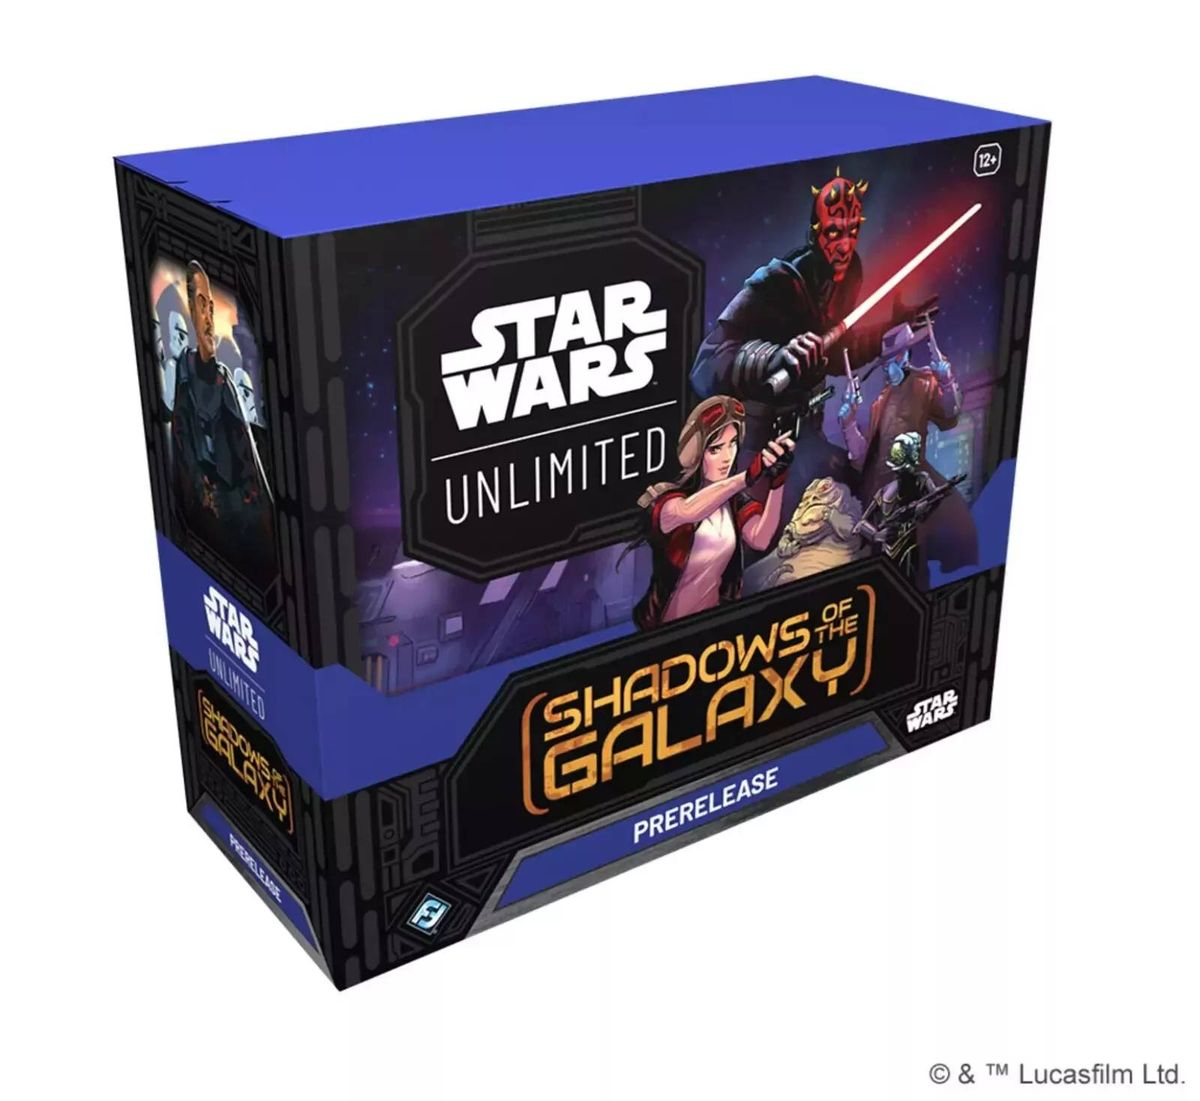 Star Wars: Unlimited - Shadows of the Galaxy prerelease event